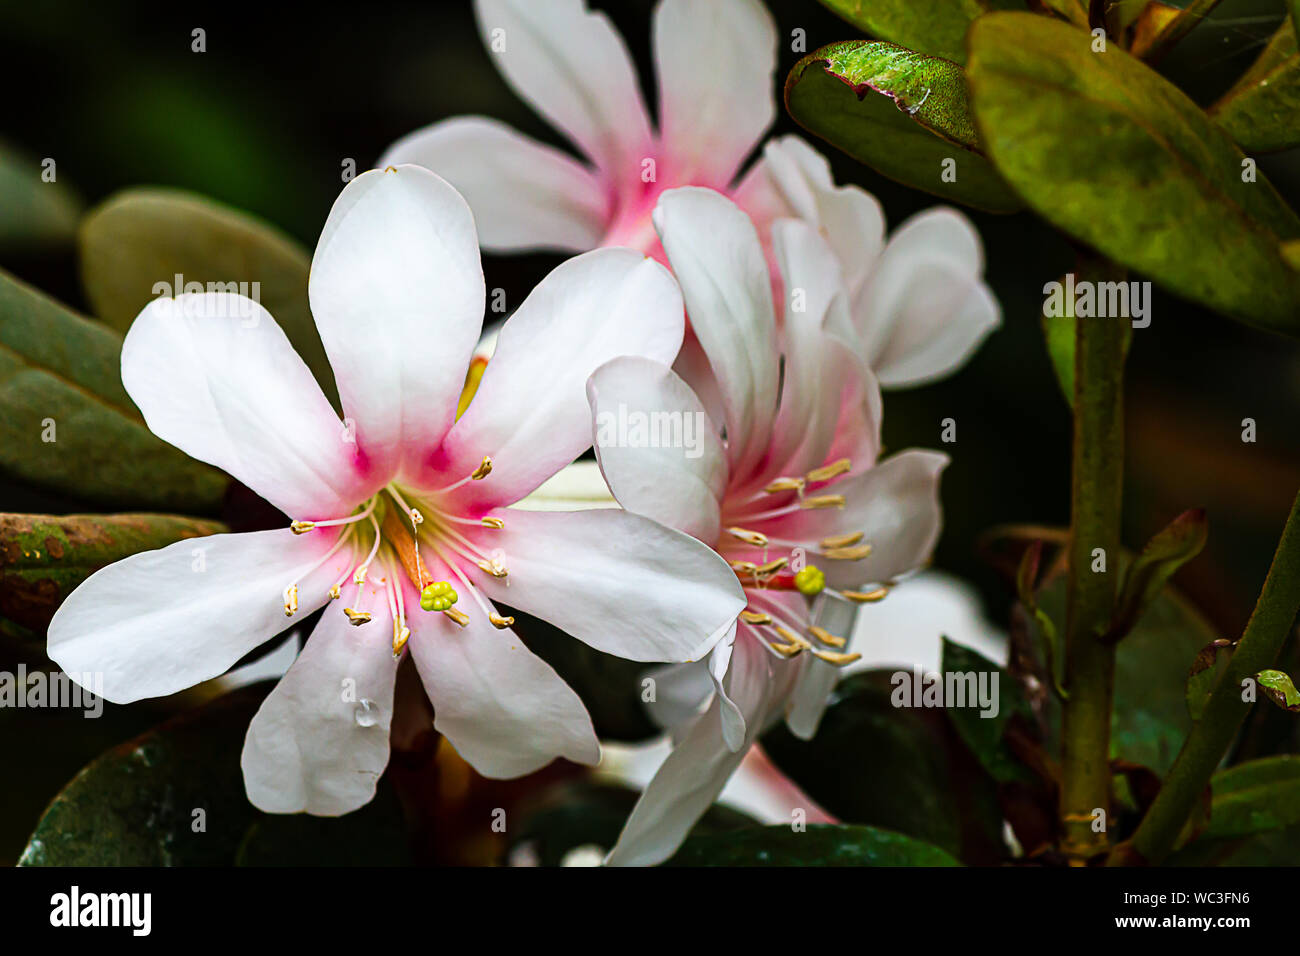 creamy white and pink waxy tropical rhododendron trumpet shaped flowers with leaves Stock Photo